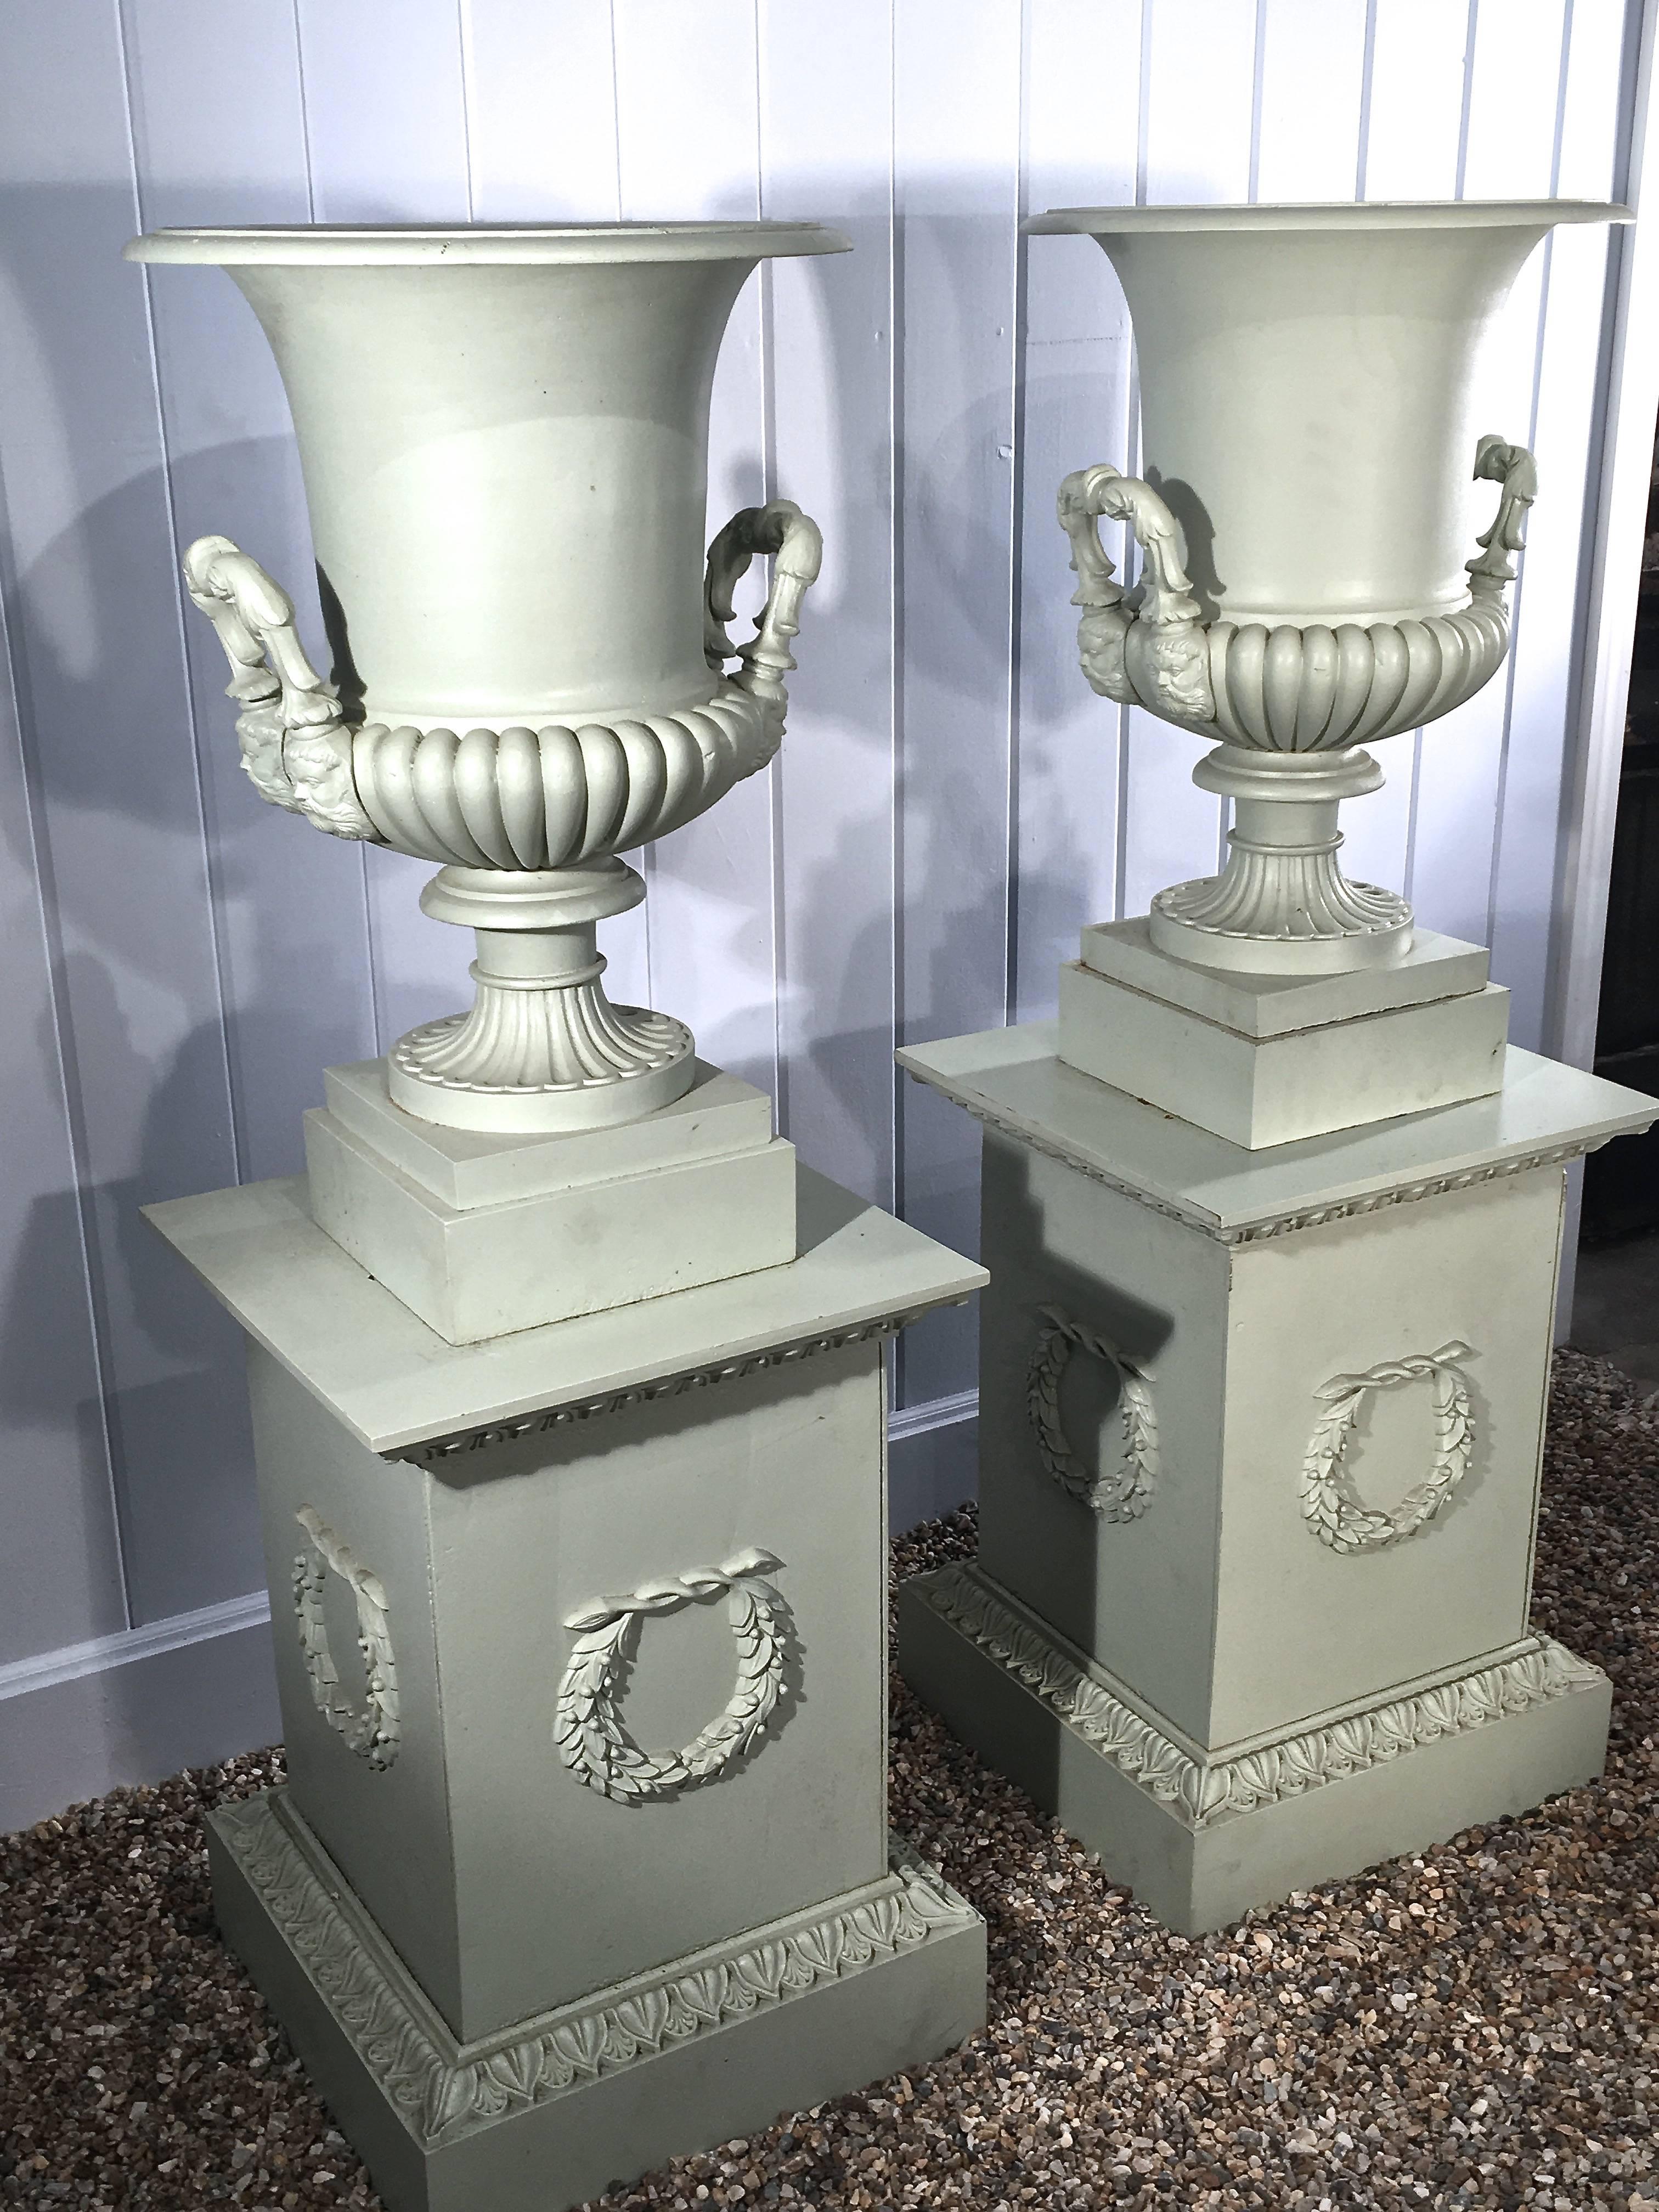 Neoclassical Revival Pair of 19th Century French Cast Iron Masked Urns on Tall Plinths